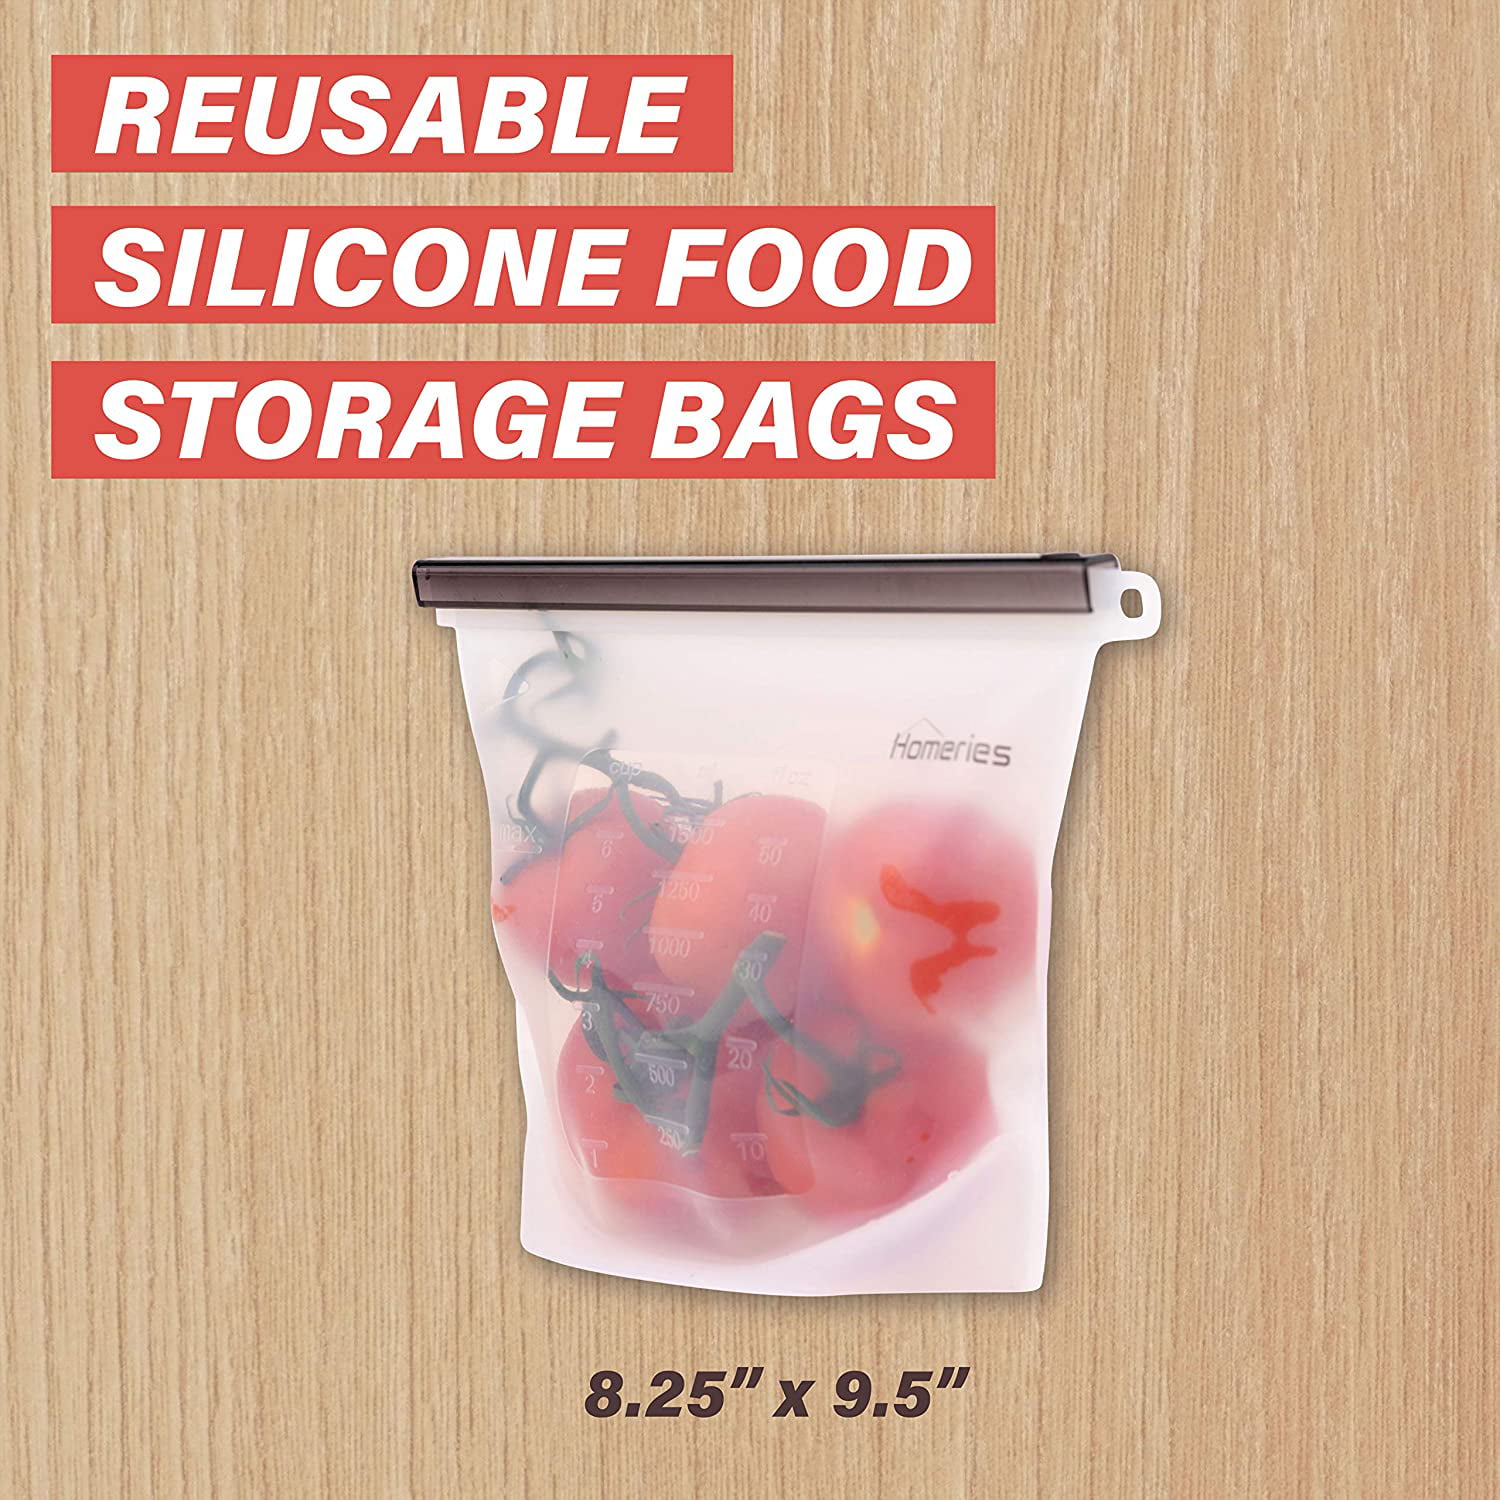 FOSOE 3 Pack Reusable Silicone Food Storage Bags - BPA Free - Food Grade  Gallon Bags - Snack Sandwich Storage Containers - Leakproof Freezer